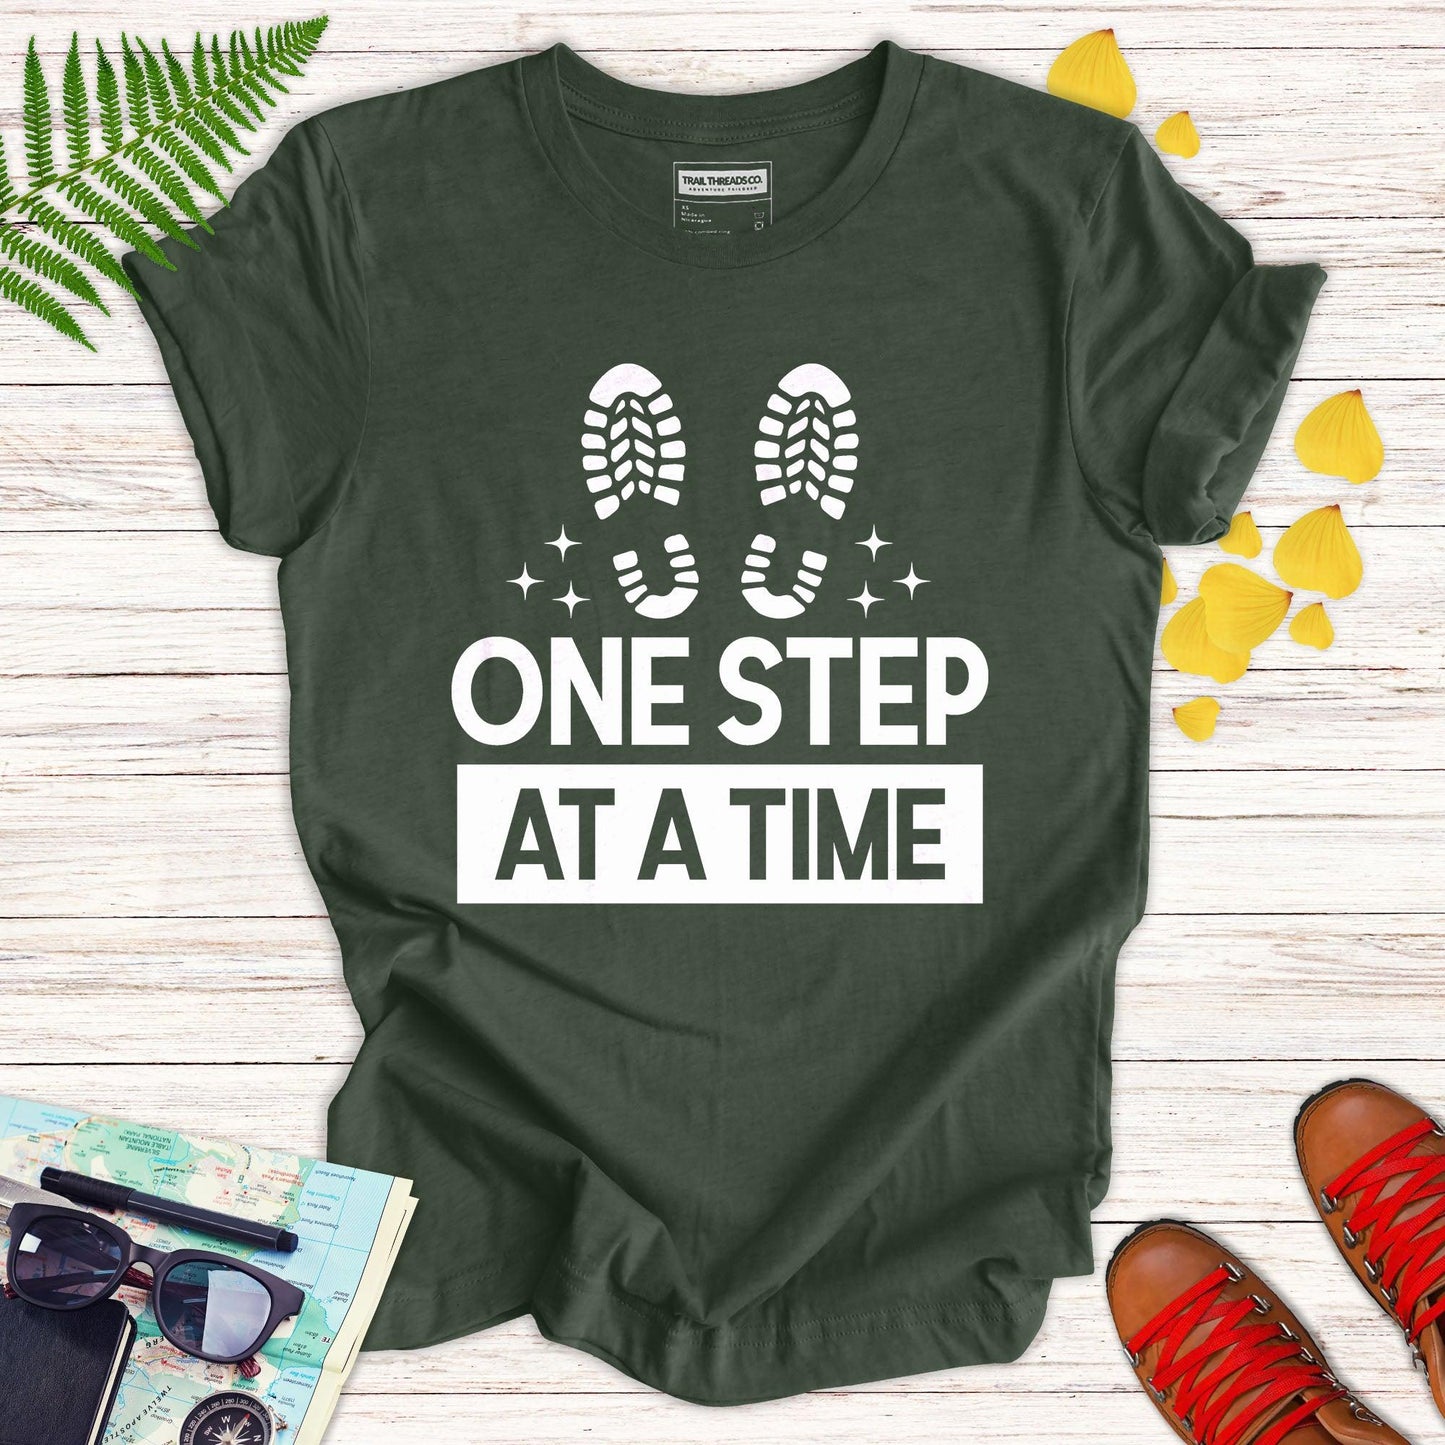 One Step at a Time T-shirt - Trail Threads Co. Limited